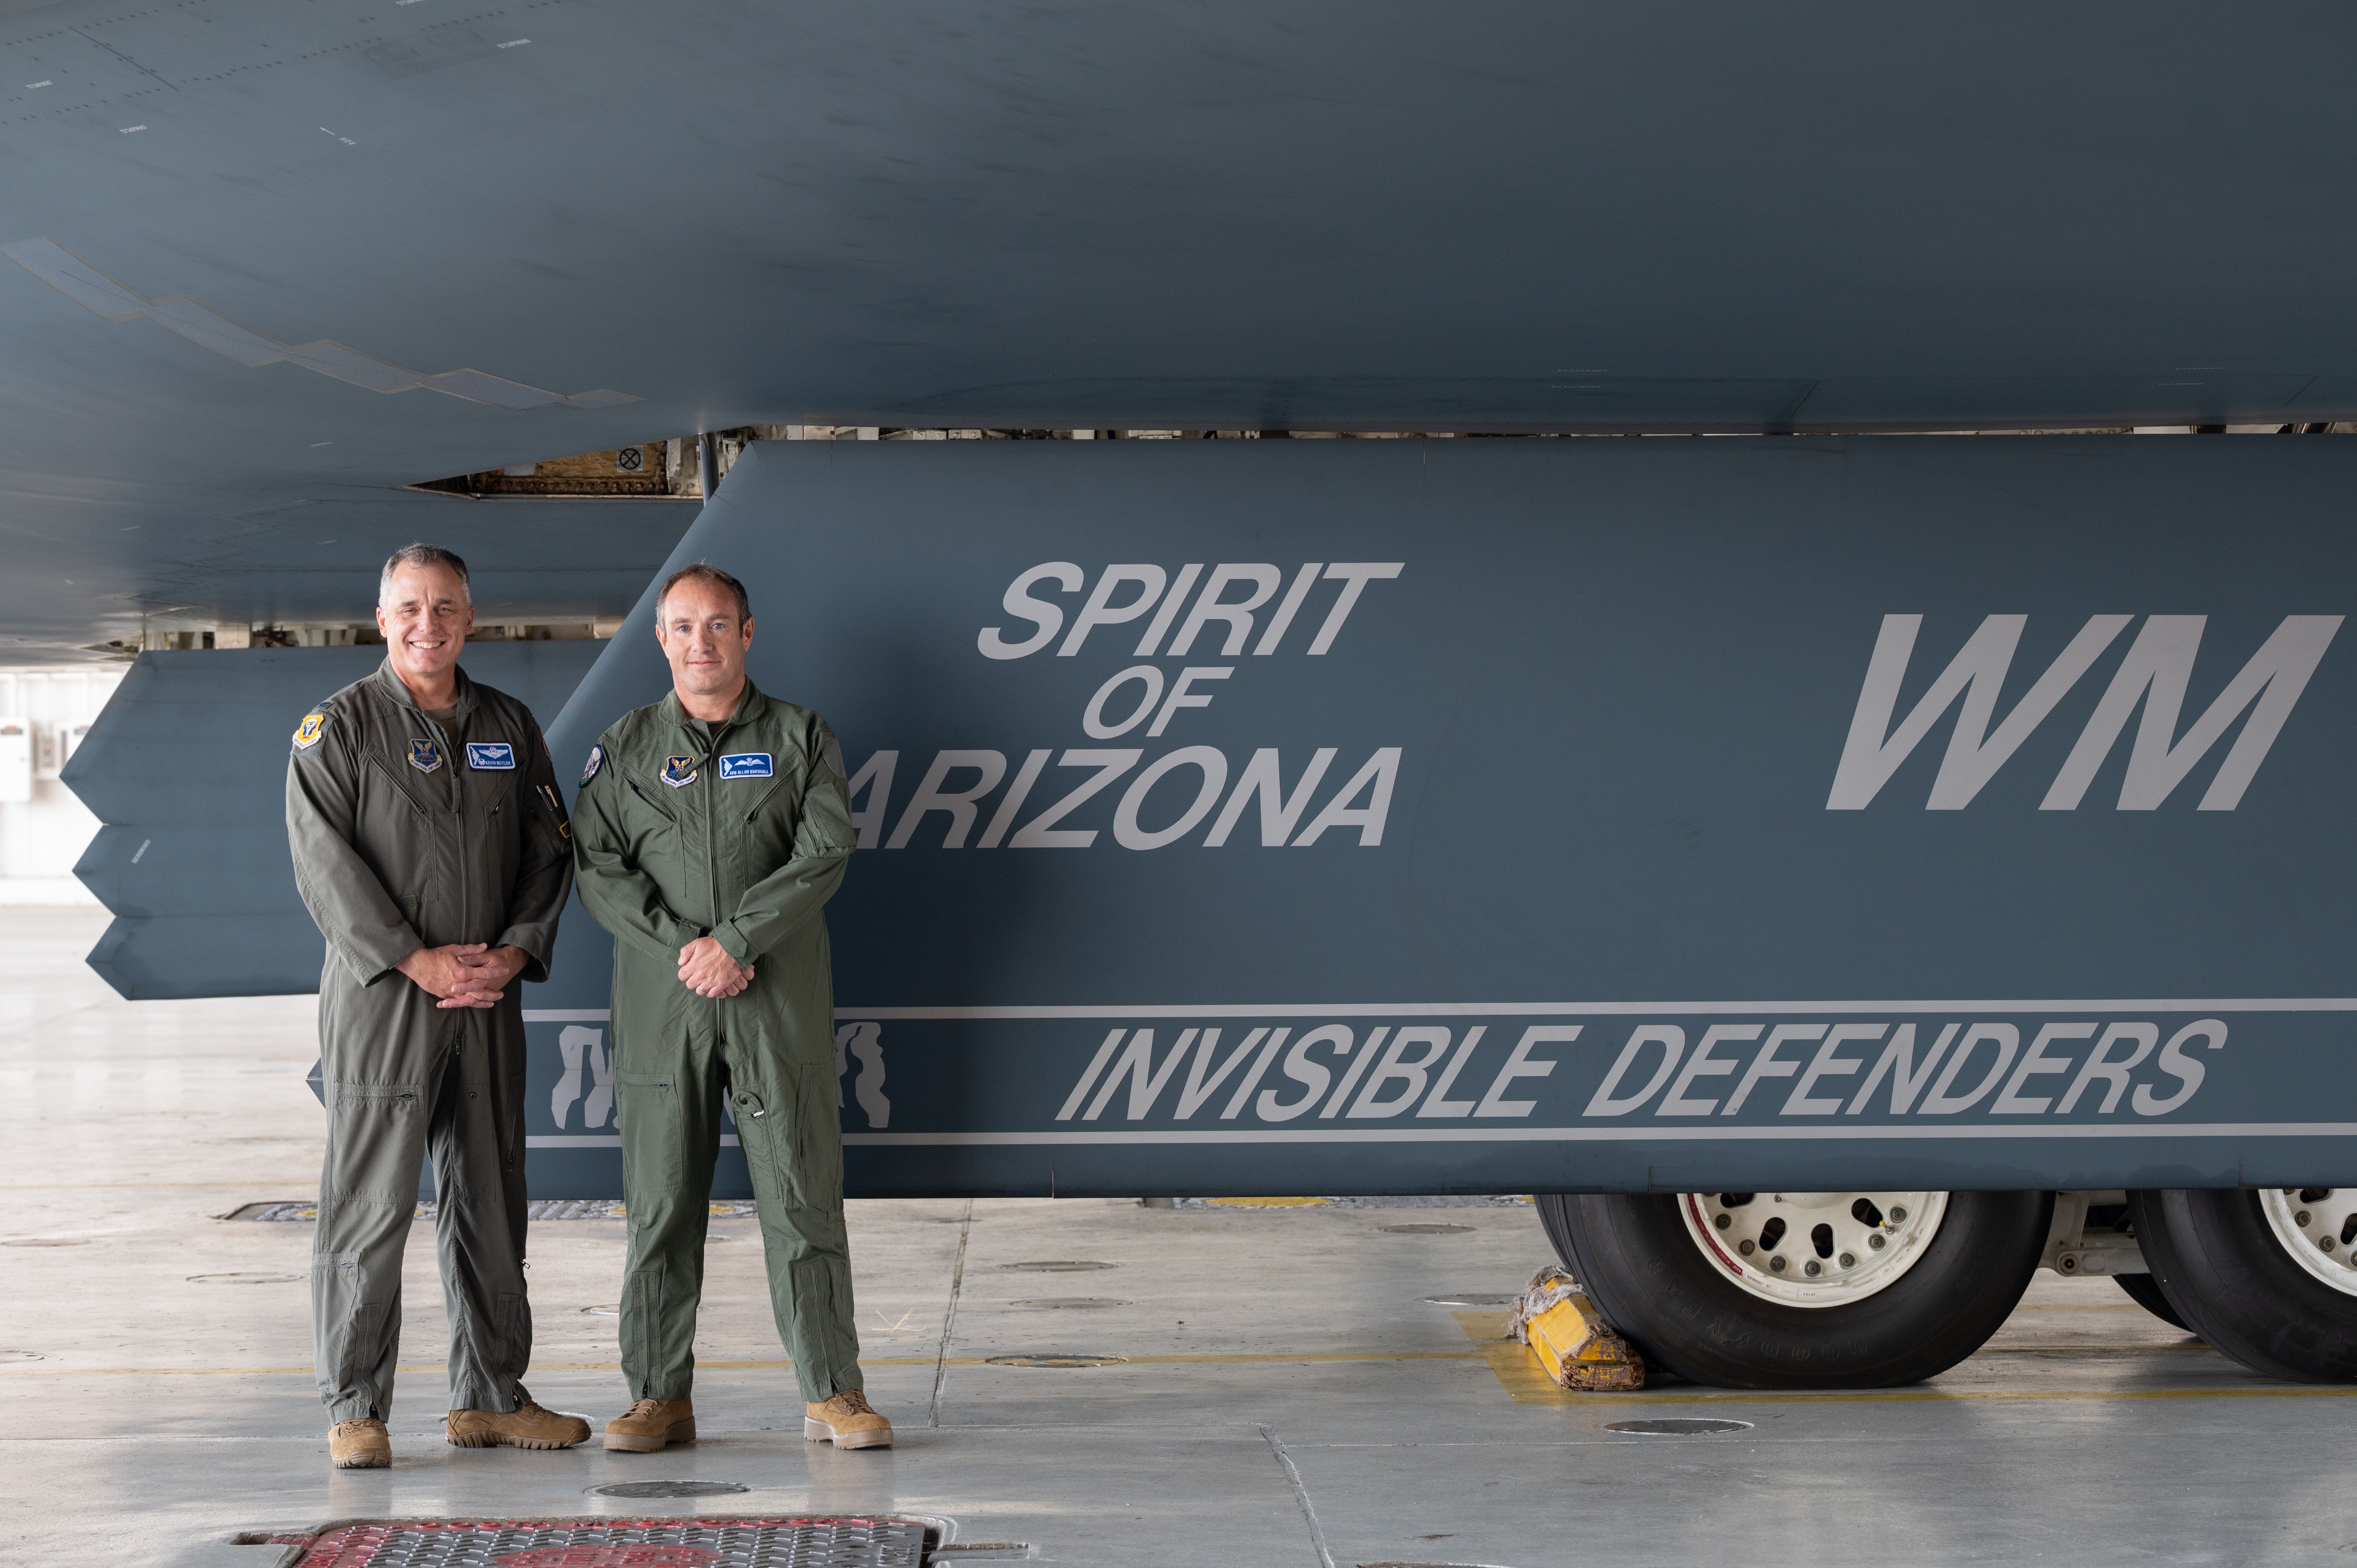 Butler (left) and Marshall (right) in front of B-2 bomber